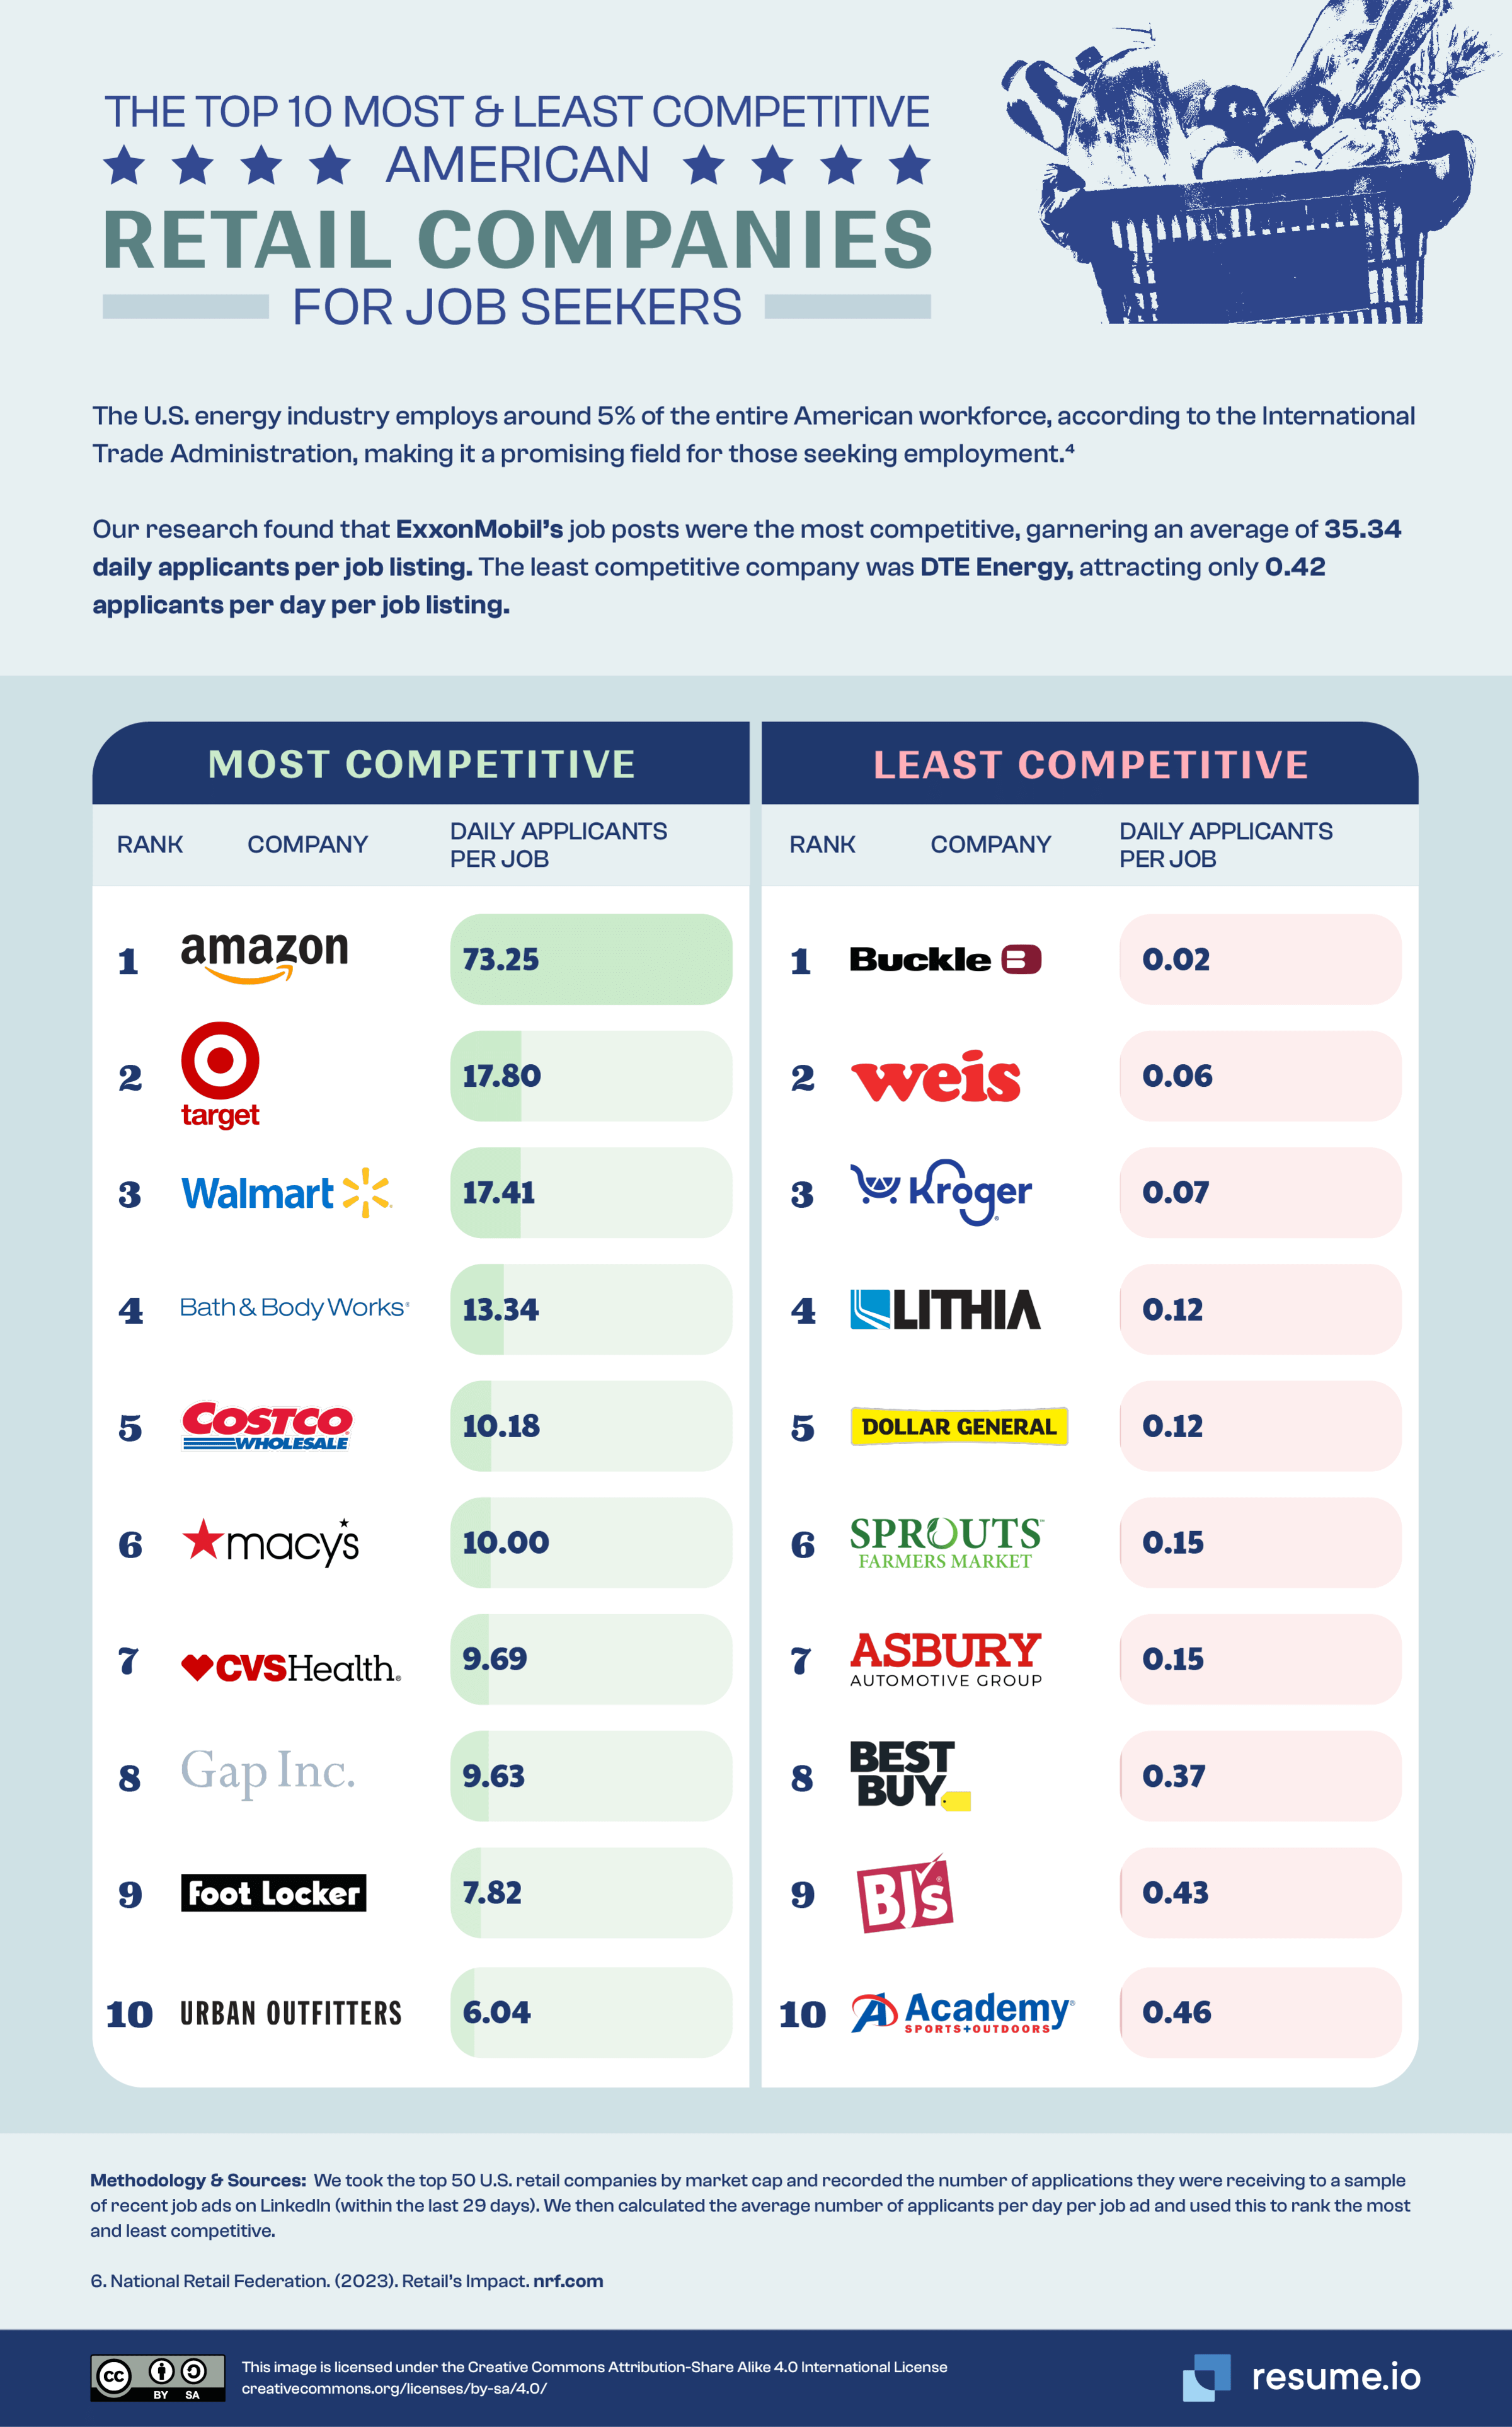 Top 10 most and least competitive retail companies